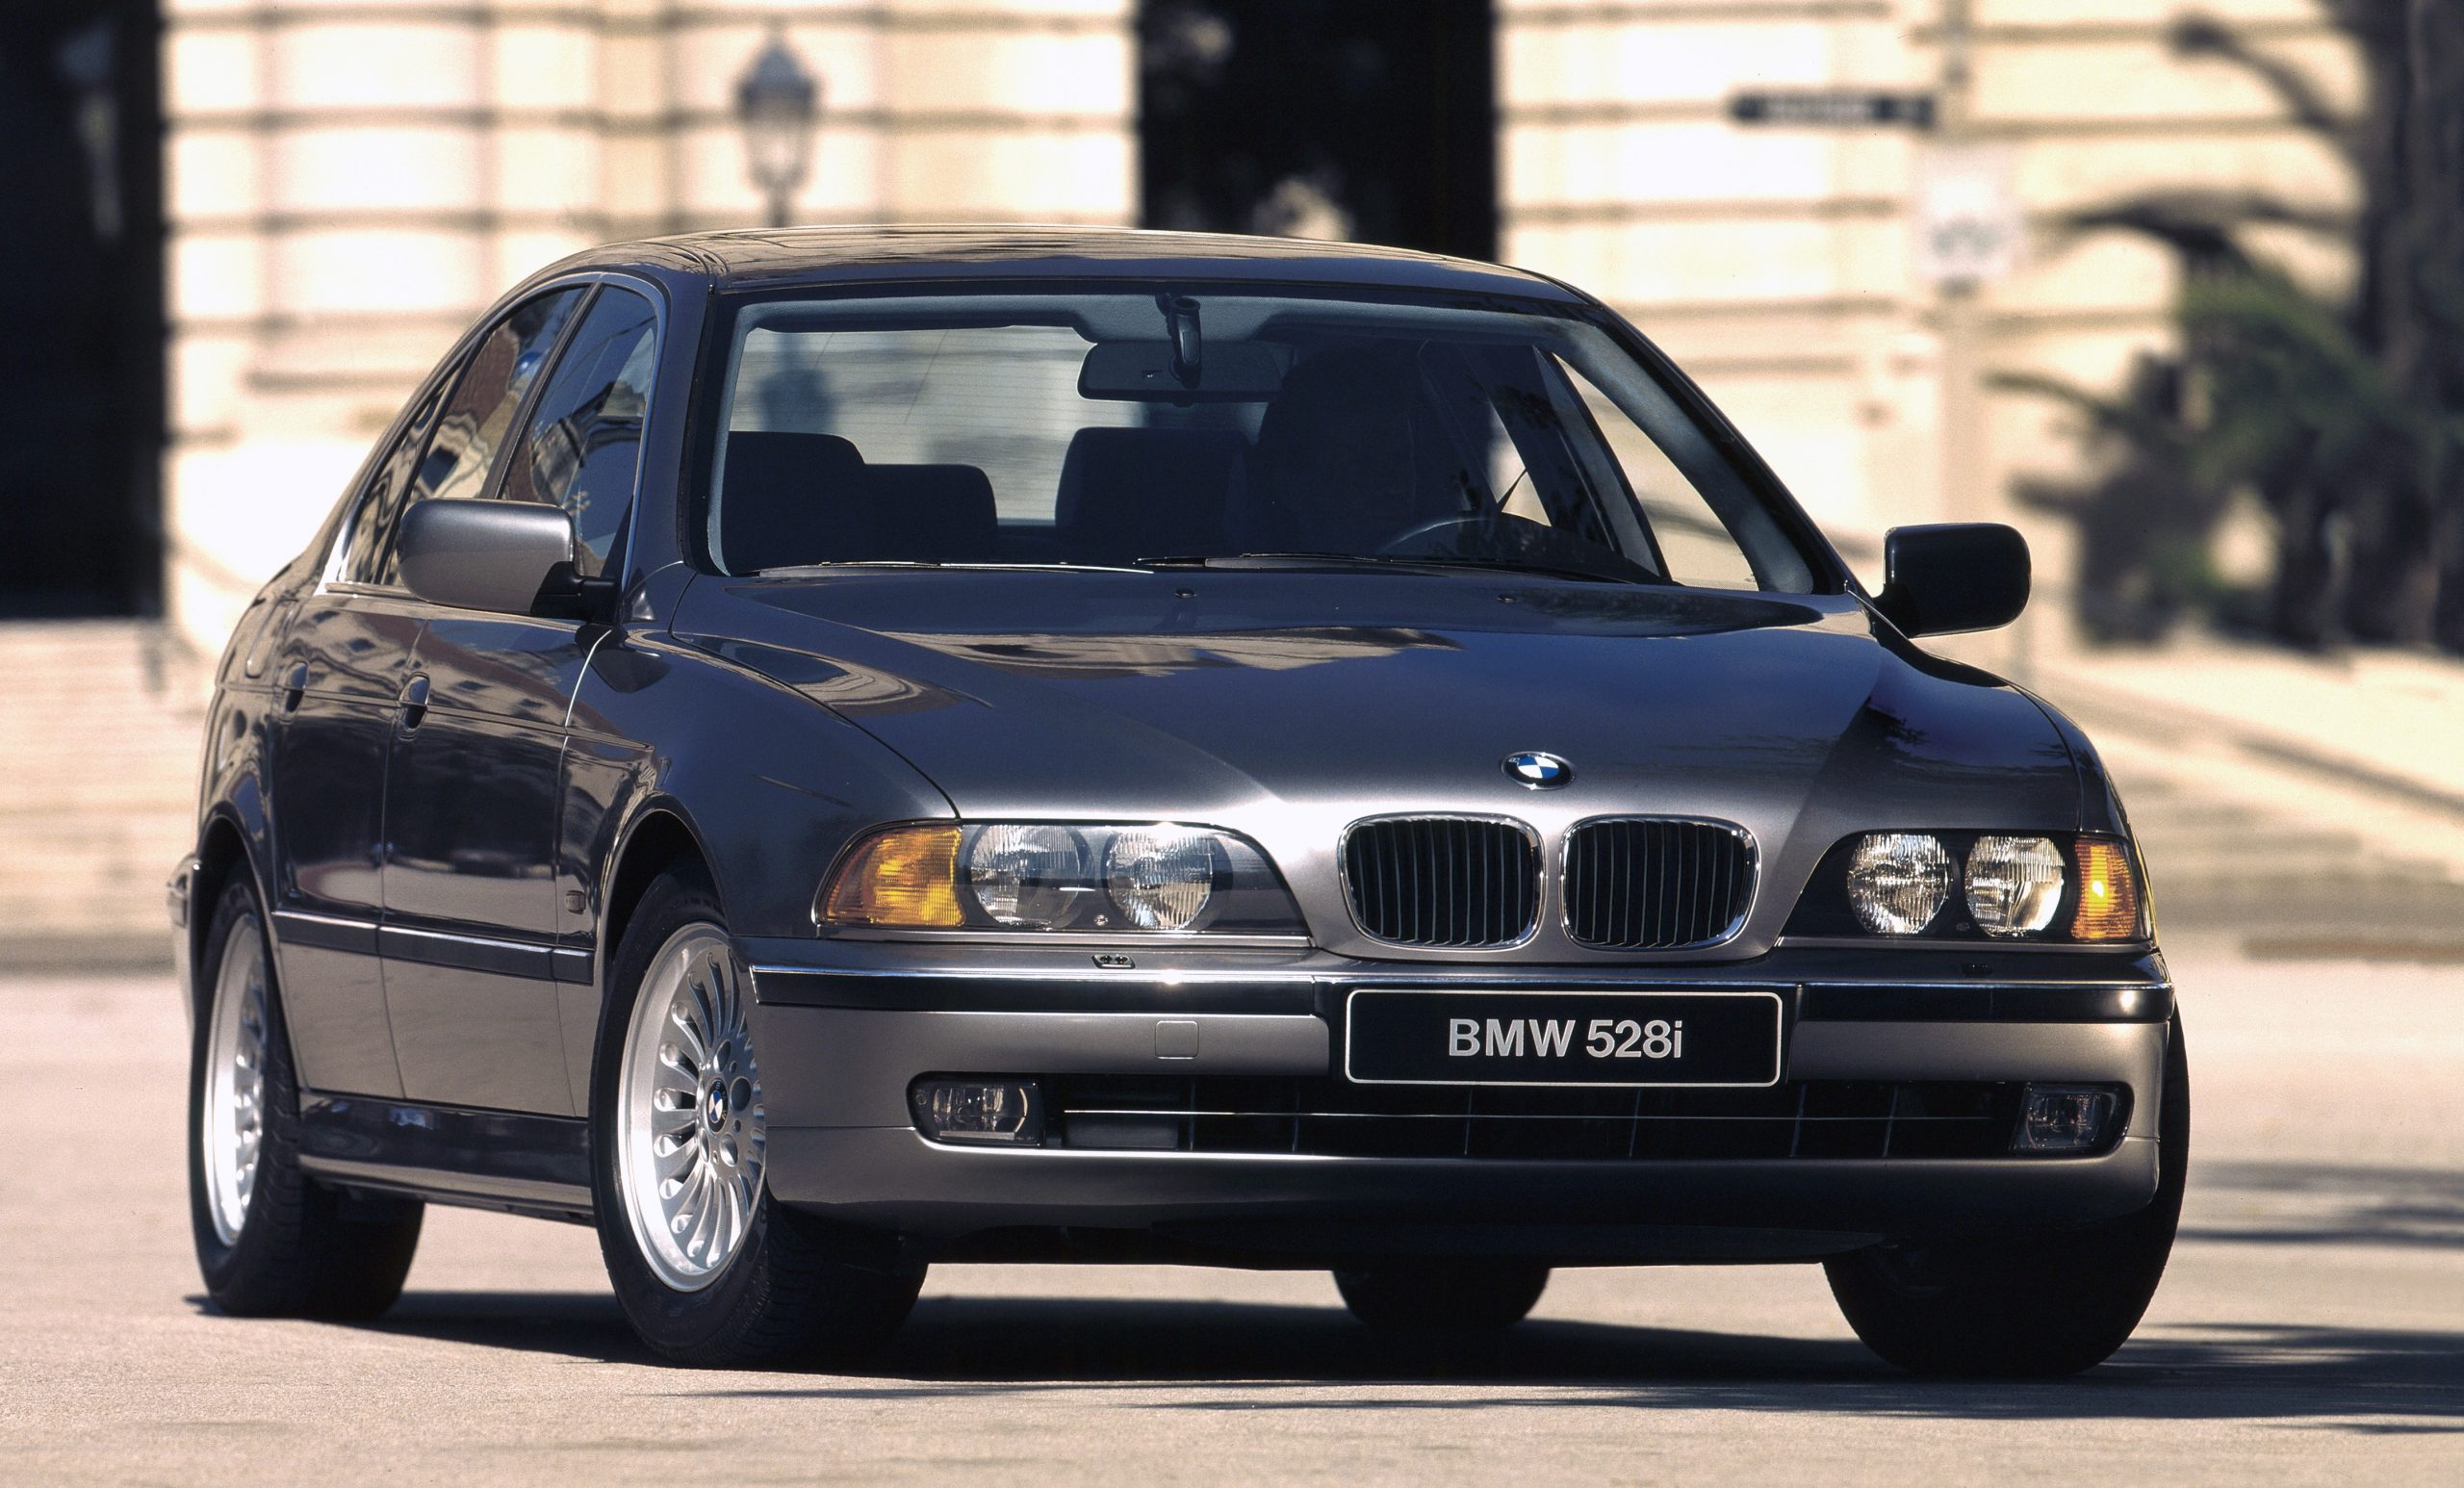 BMW E39 - The Most Reliable BMW